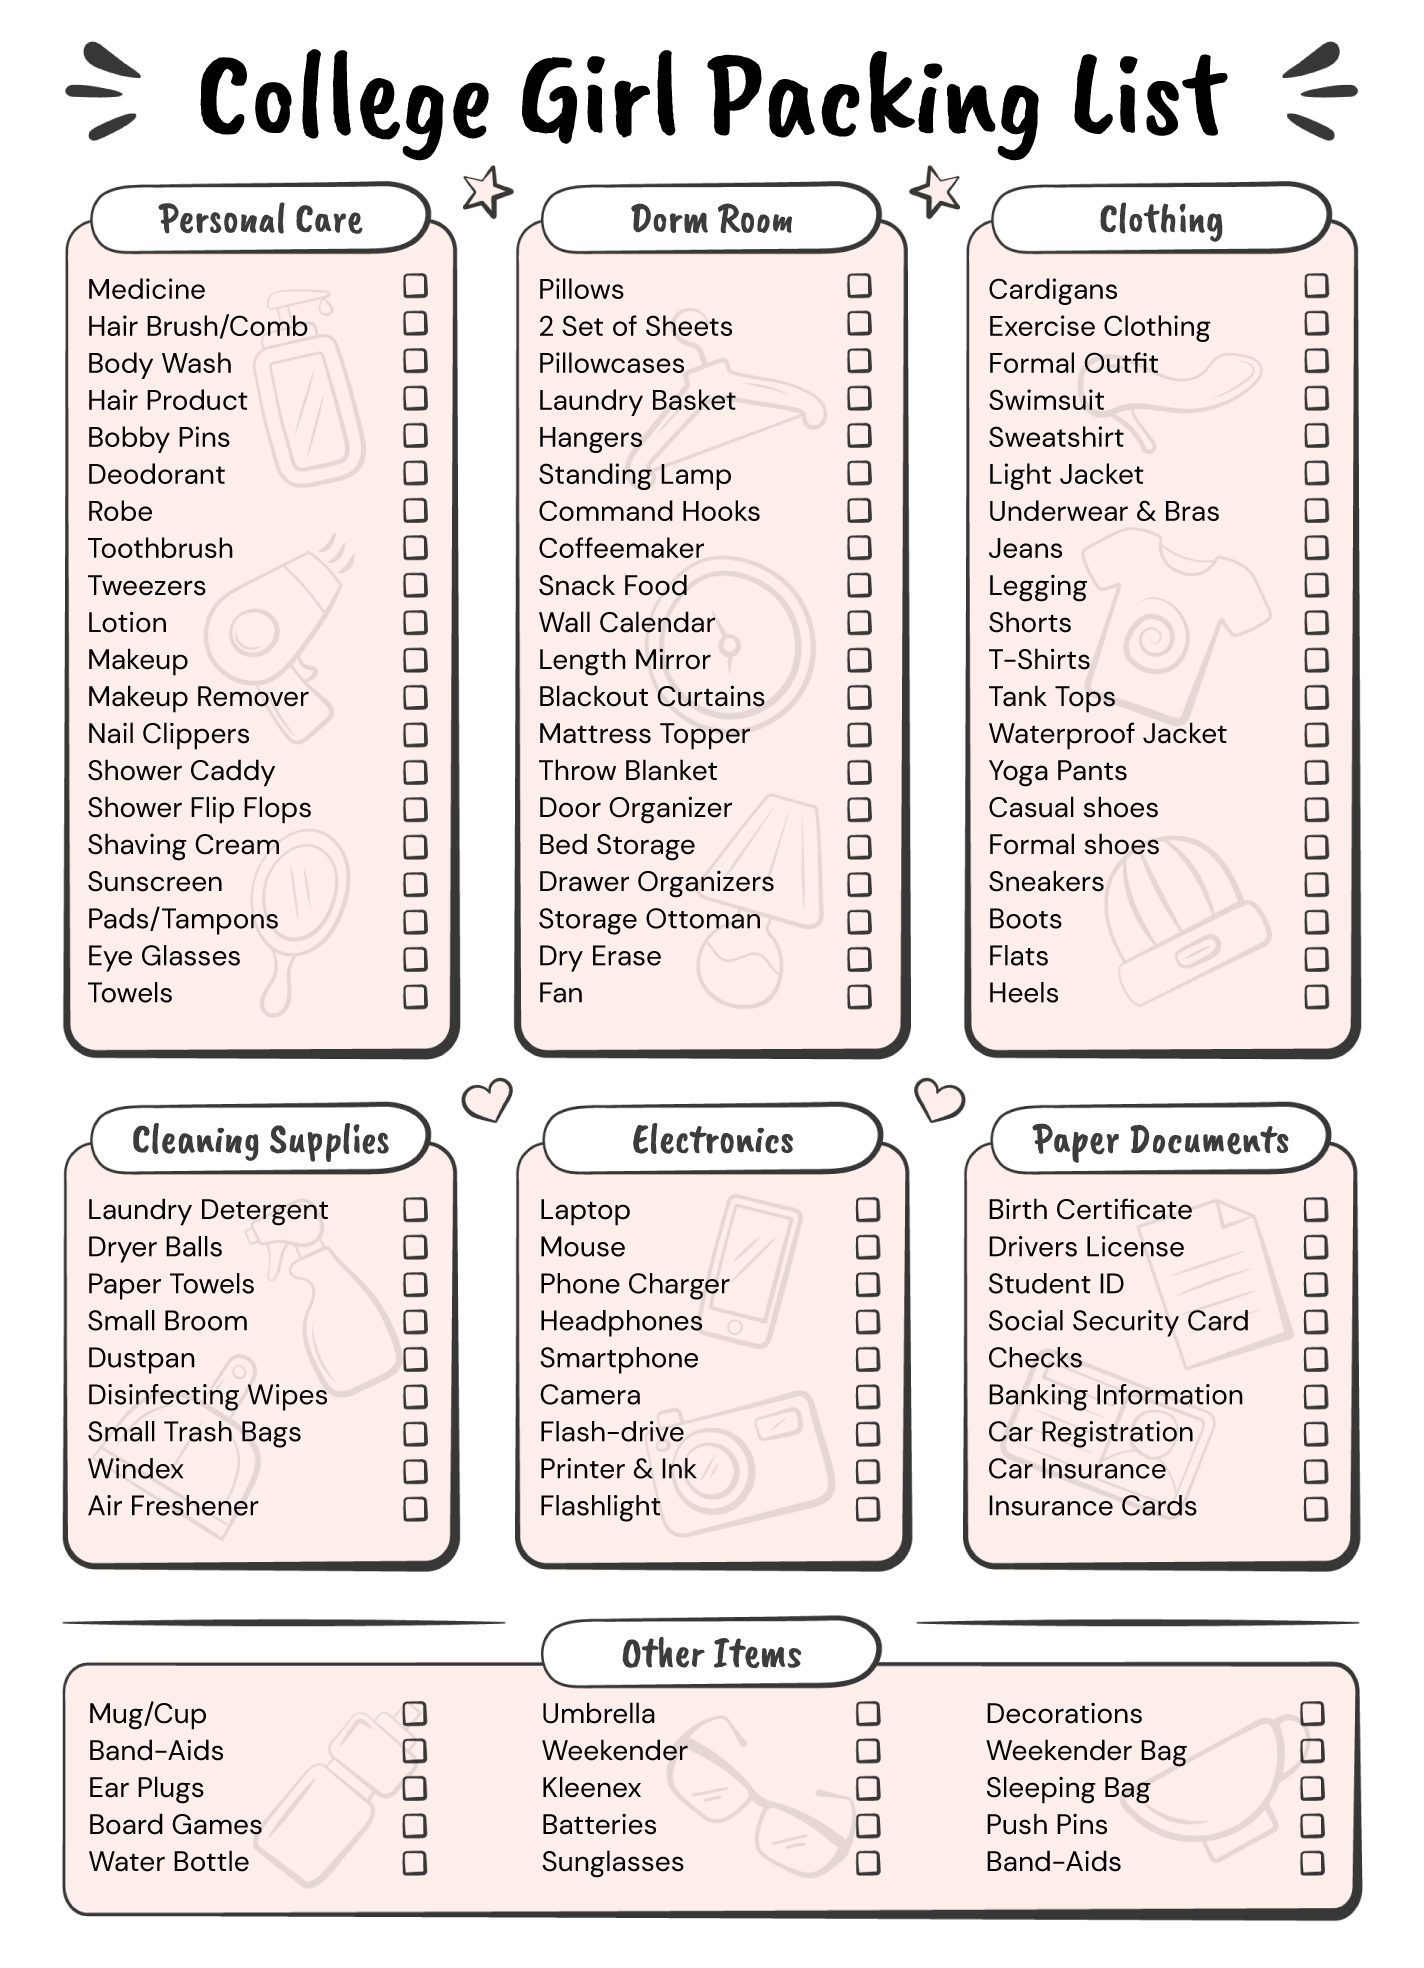 college girl packing list free google docs template gdoc io